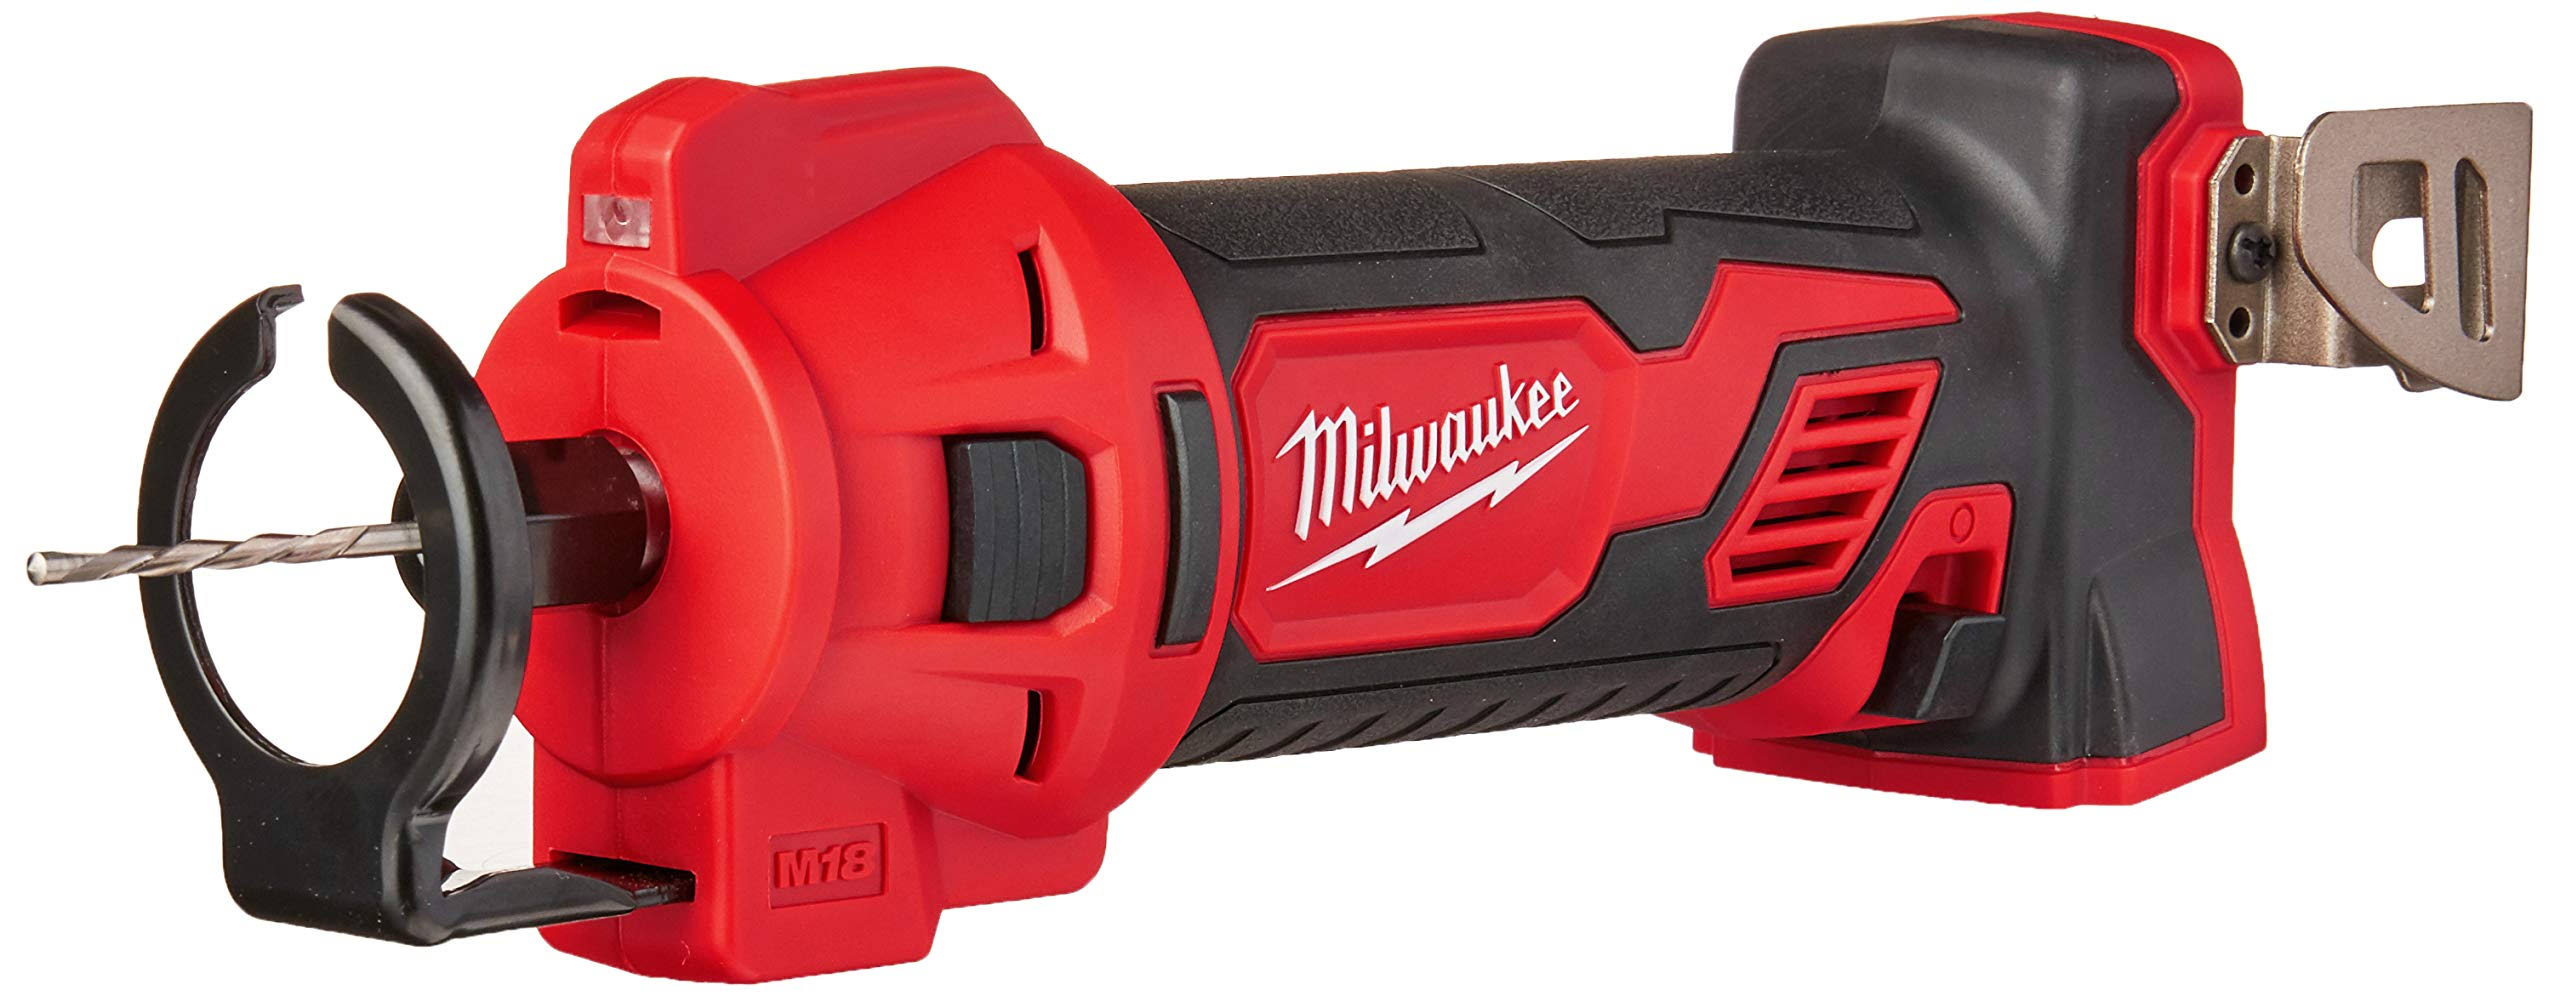 Milwaukee 262720 Lithium Ion Cordless Cut Out Tool Bare Tool - 18V